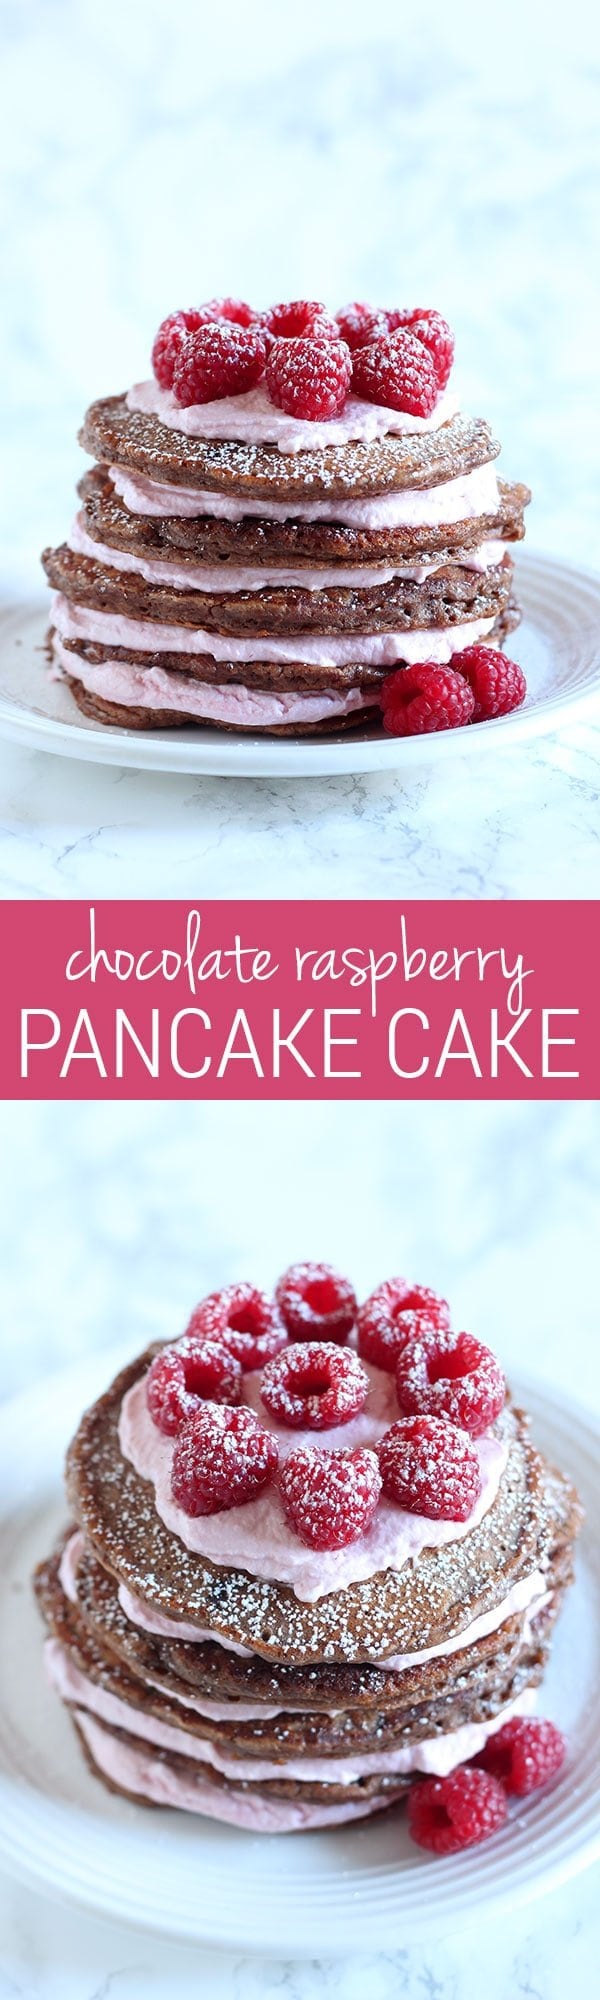 SO PRETTY! Chocolate Raspberry Pancake Cake features homemade double chocolate pancakes between layers of fresh raspberry whipped cream for a beautifully impressive breakfast treat.